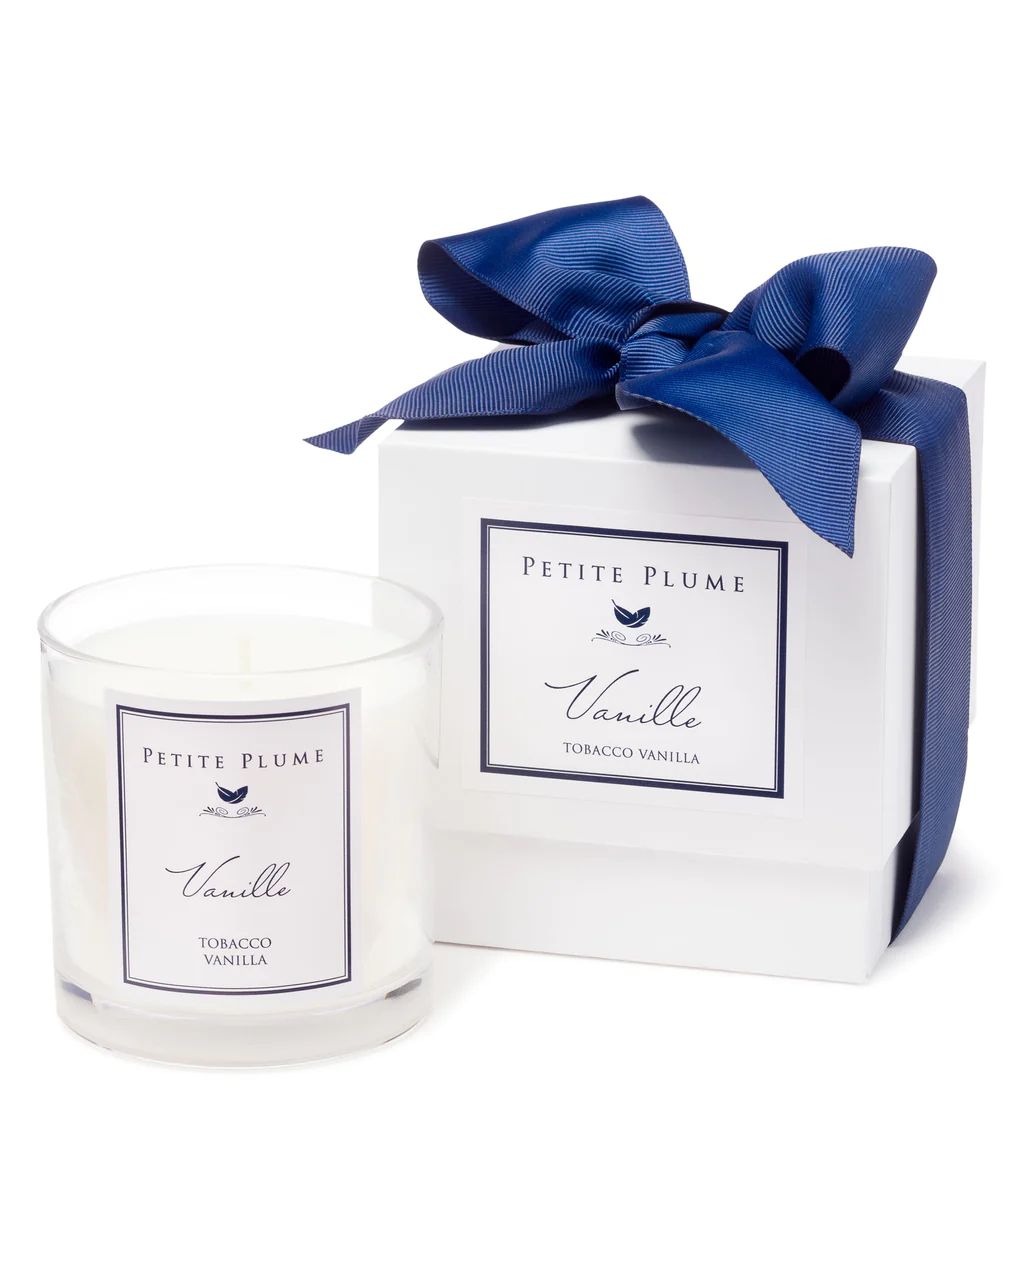 Petite Plume Luxe Vanille Candle | Petite Plume